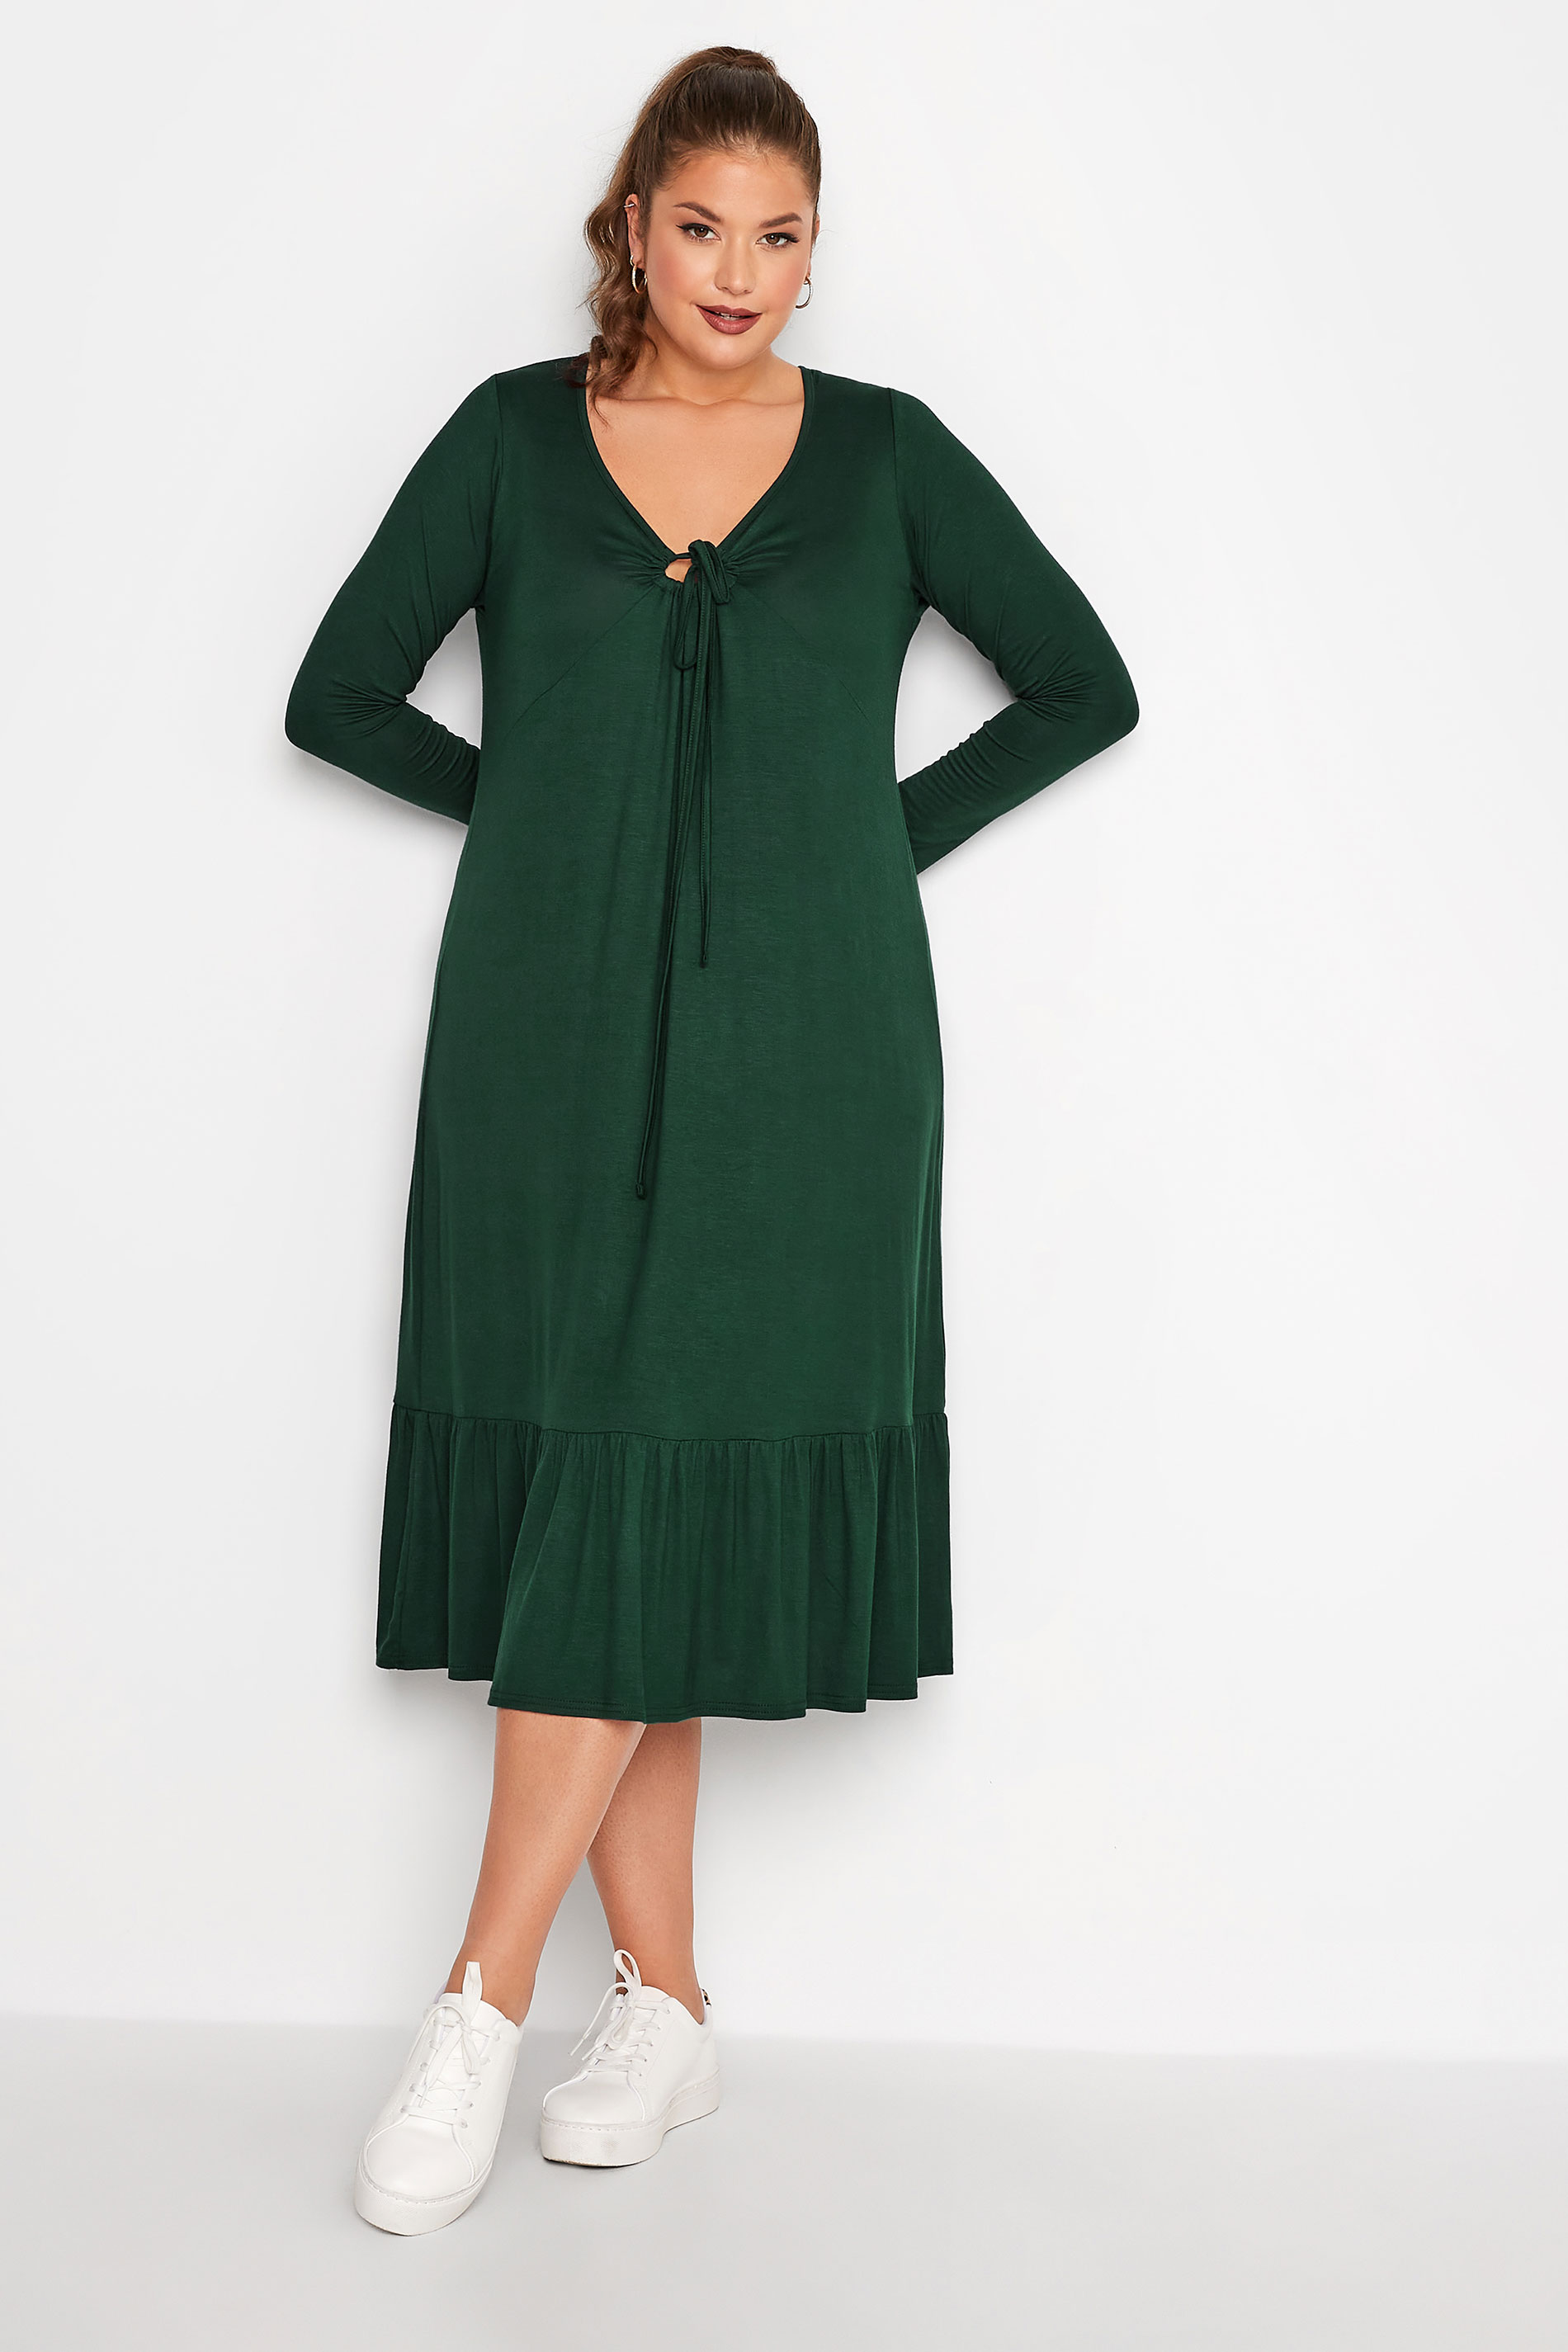 LIMITED COLLECTION Plus Size Forest Green Keyhole Tie Neck Midaxi Dress | Yours Clothing 3